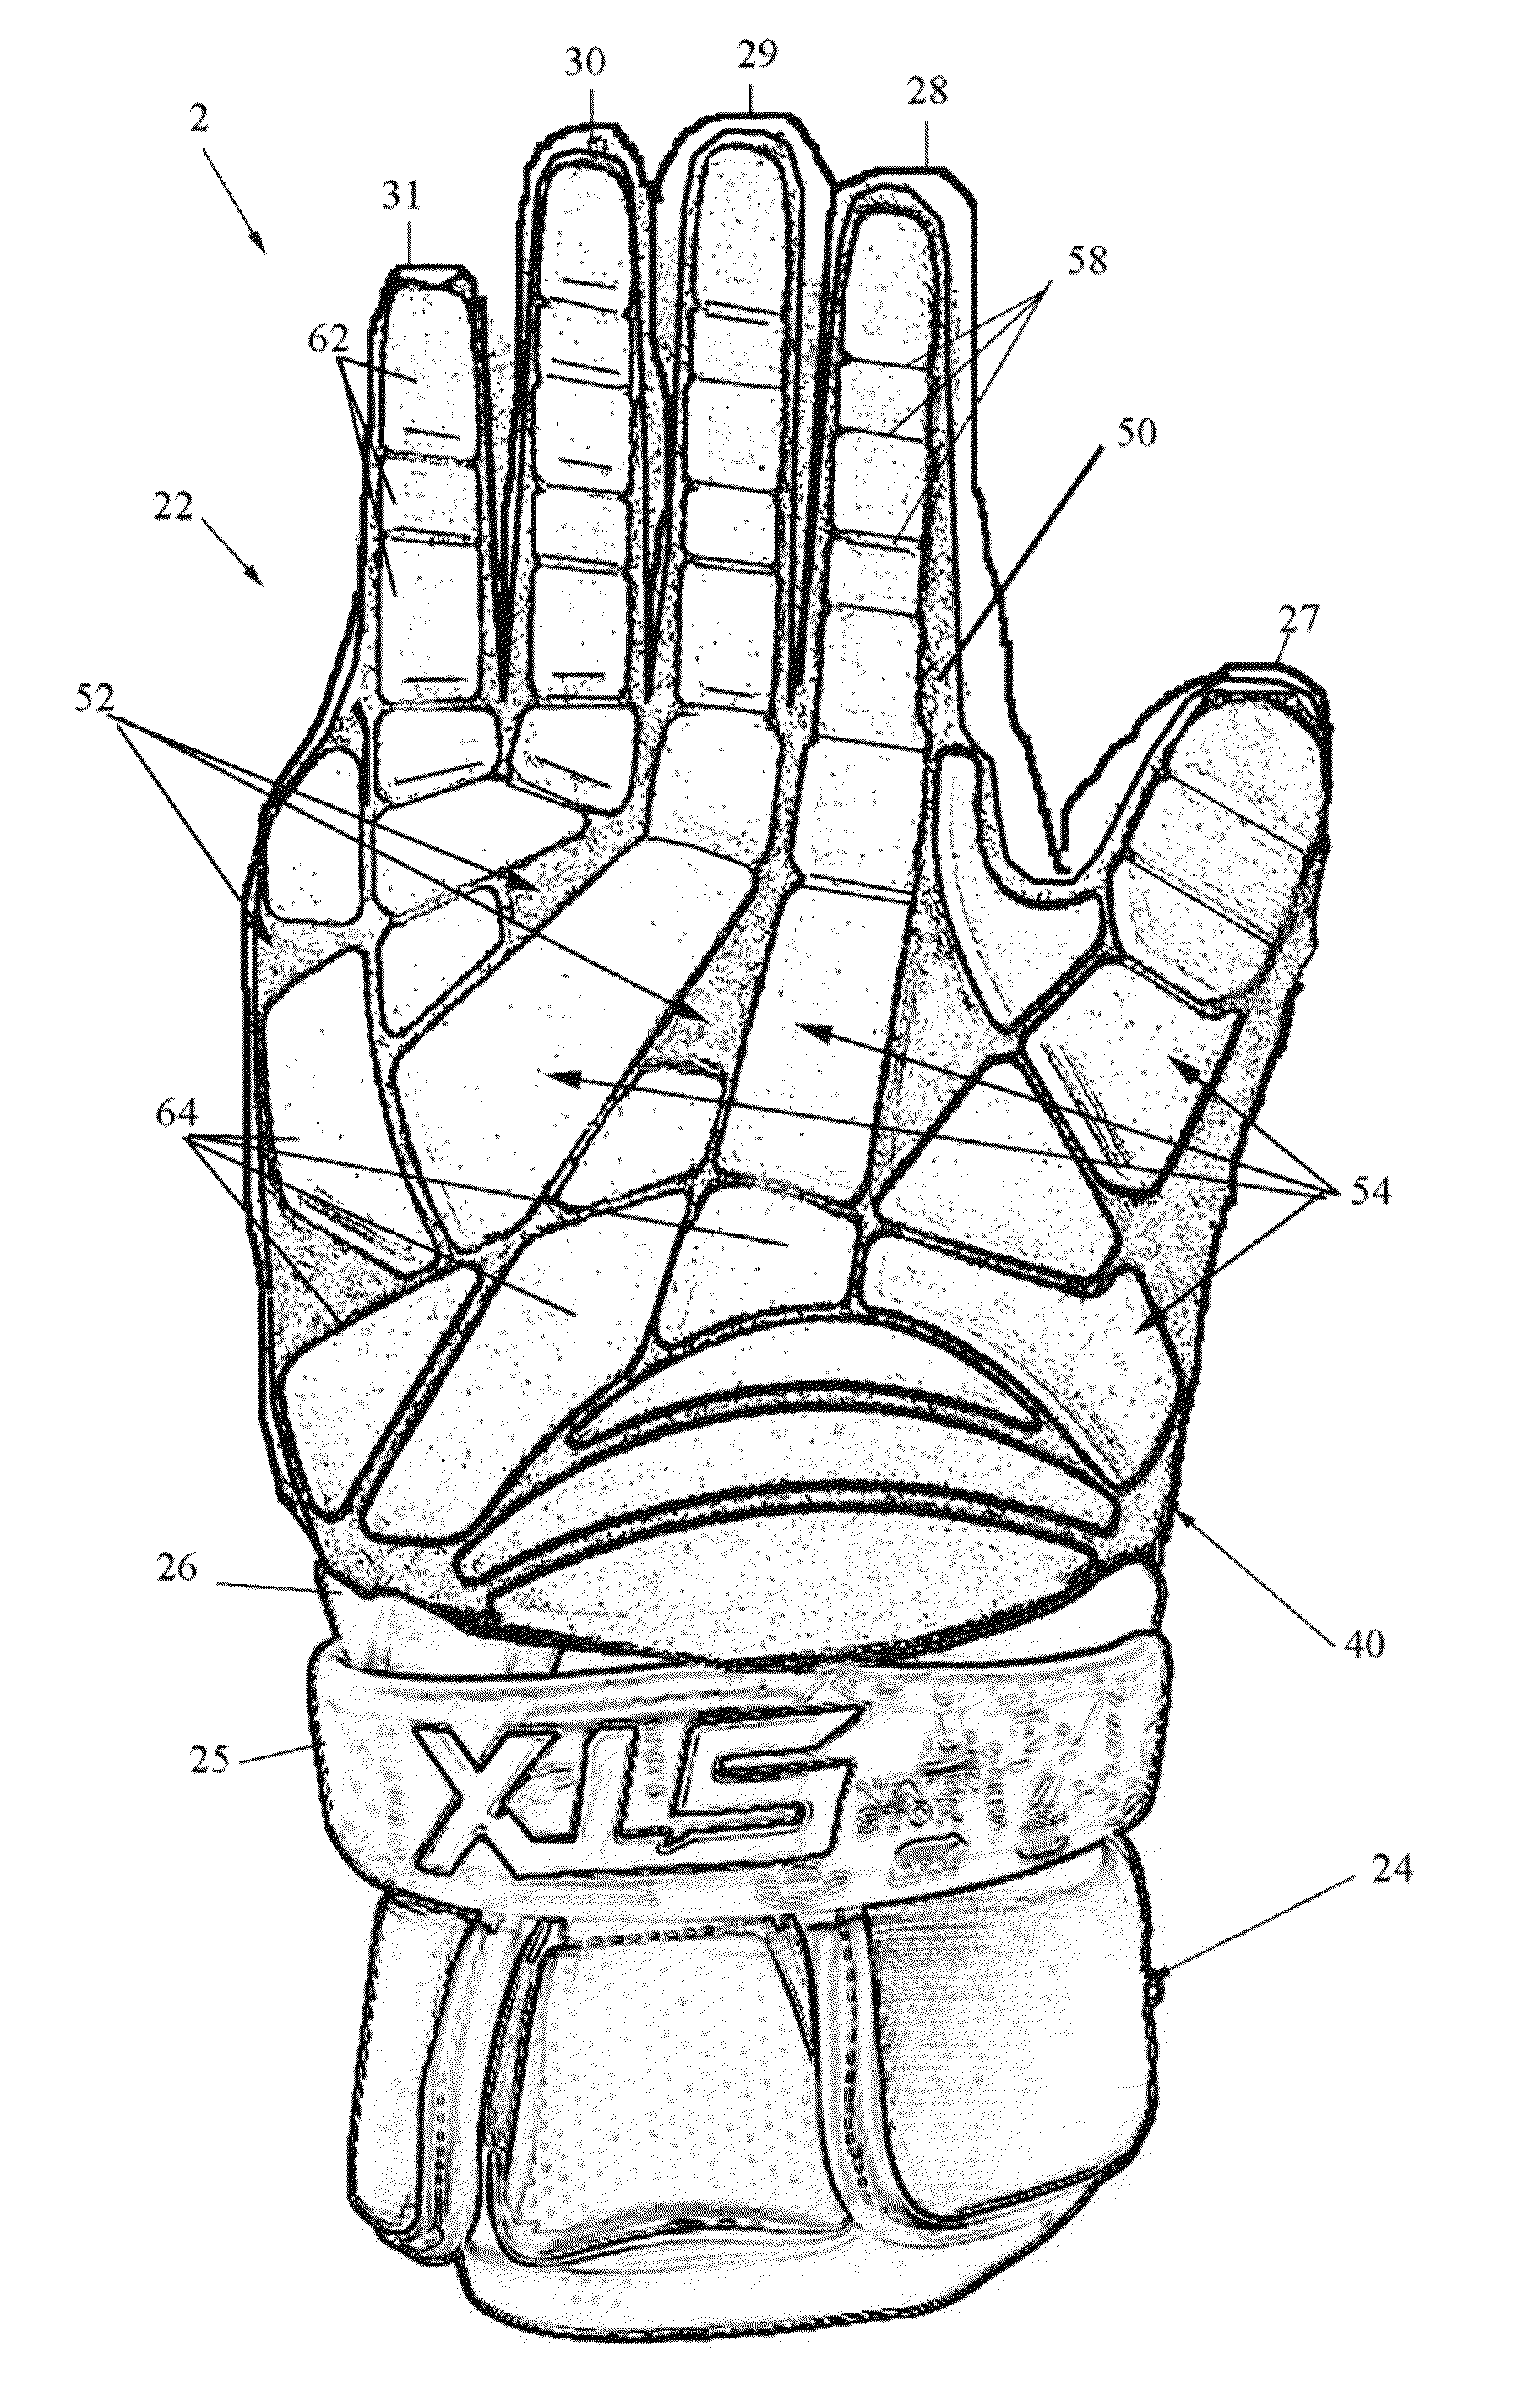 Stitchless dorsal padding for protective sports gloves and other protective gear